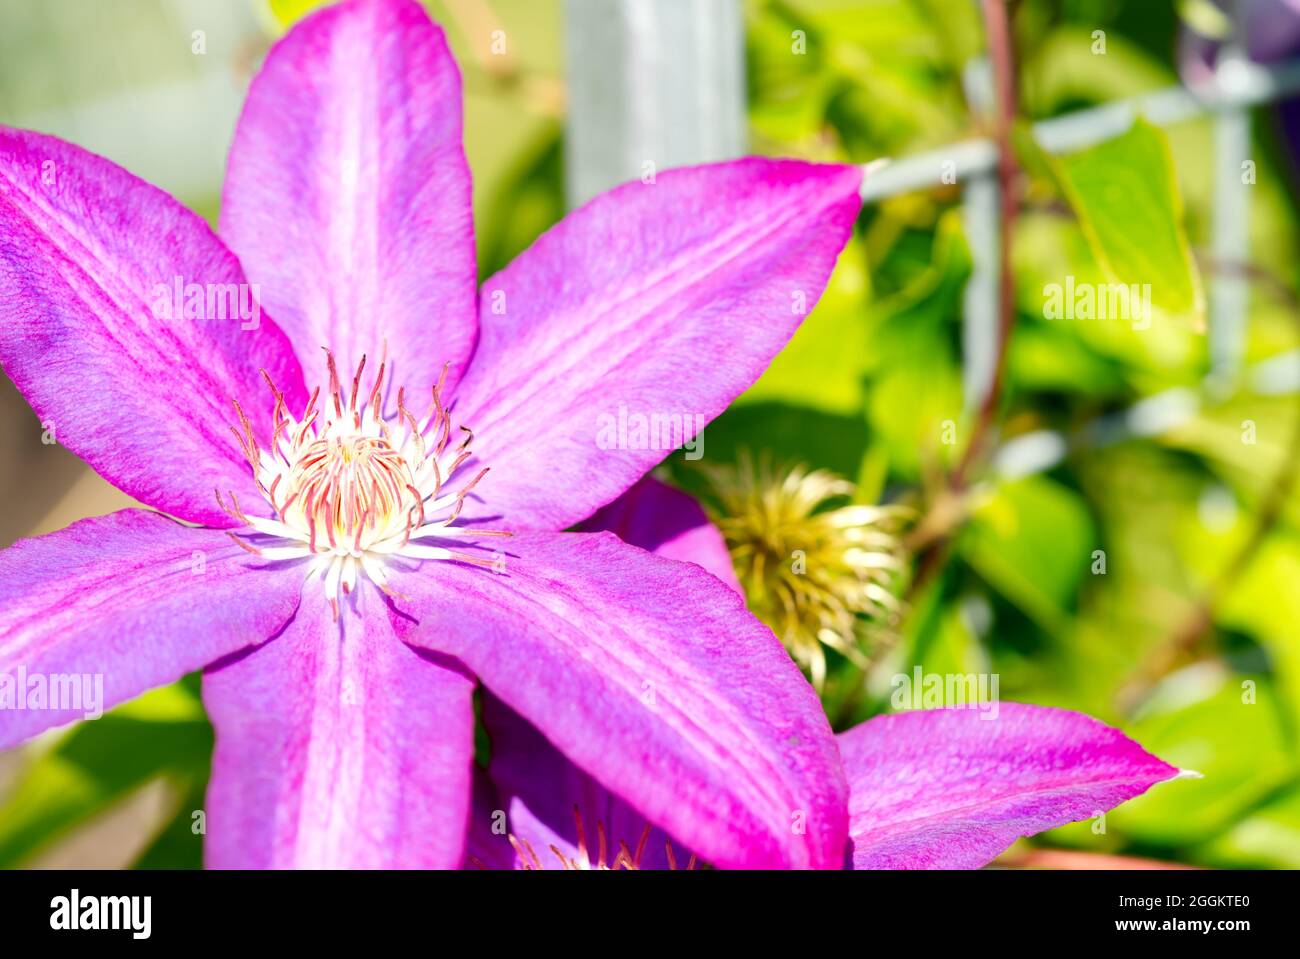 Sugar Candy Clematis pink flowers. Stock Photo